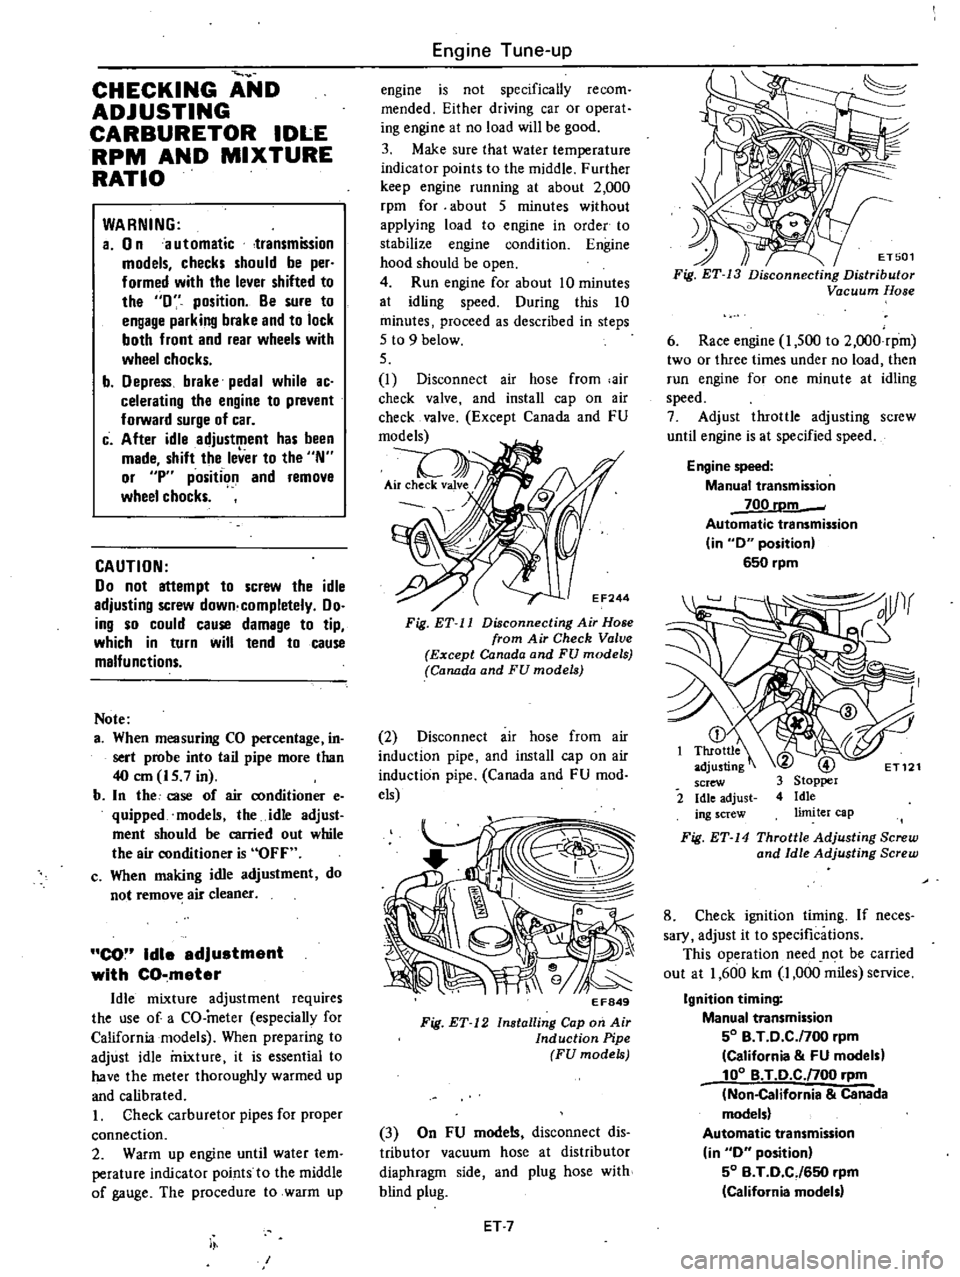 DATSUN 210 1979  Service Manual 
CHECKING 
AND

ADJUSTING

CARBURETOR 
IDLE

RPM 
AND 
MIXTURE

RATIO

WARNING

a 
0

n 
a 
utomatic 
transmission

models 
checks 
should 
be

per

formed 
with 
the 
lever 
shifted 
to

the 
0

posi